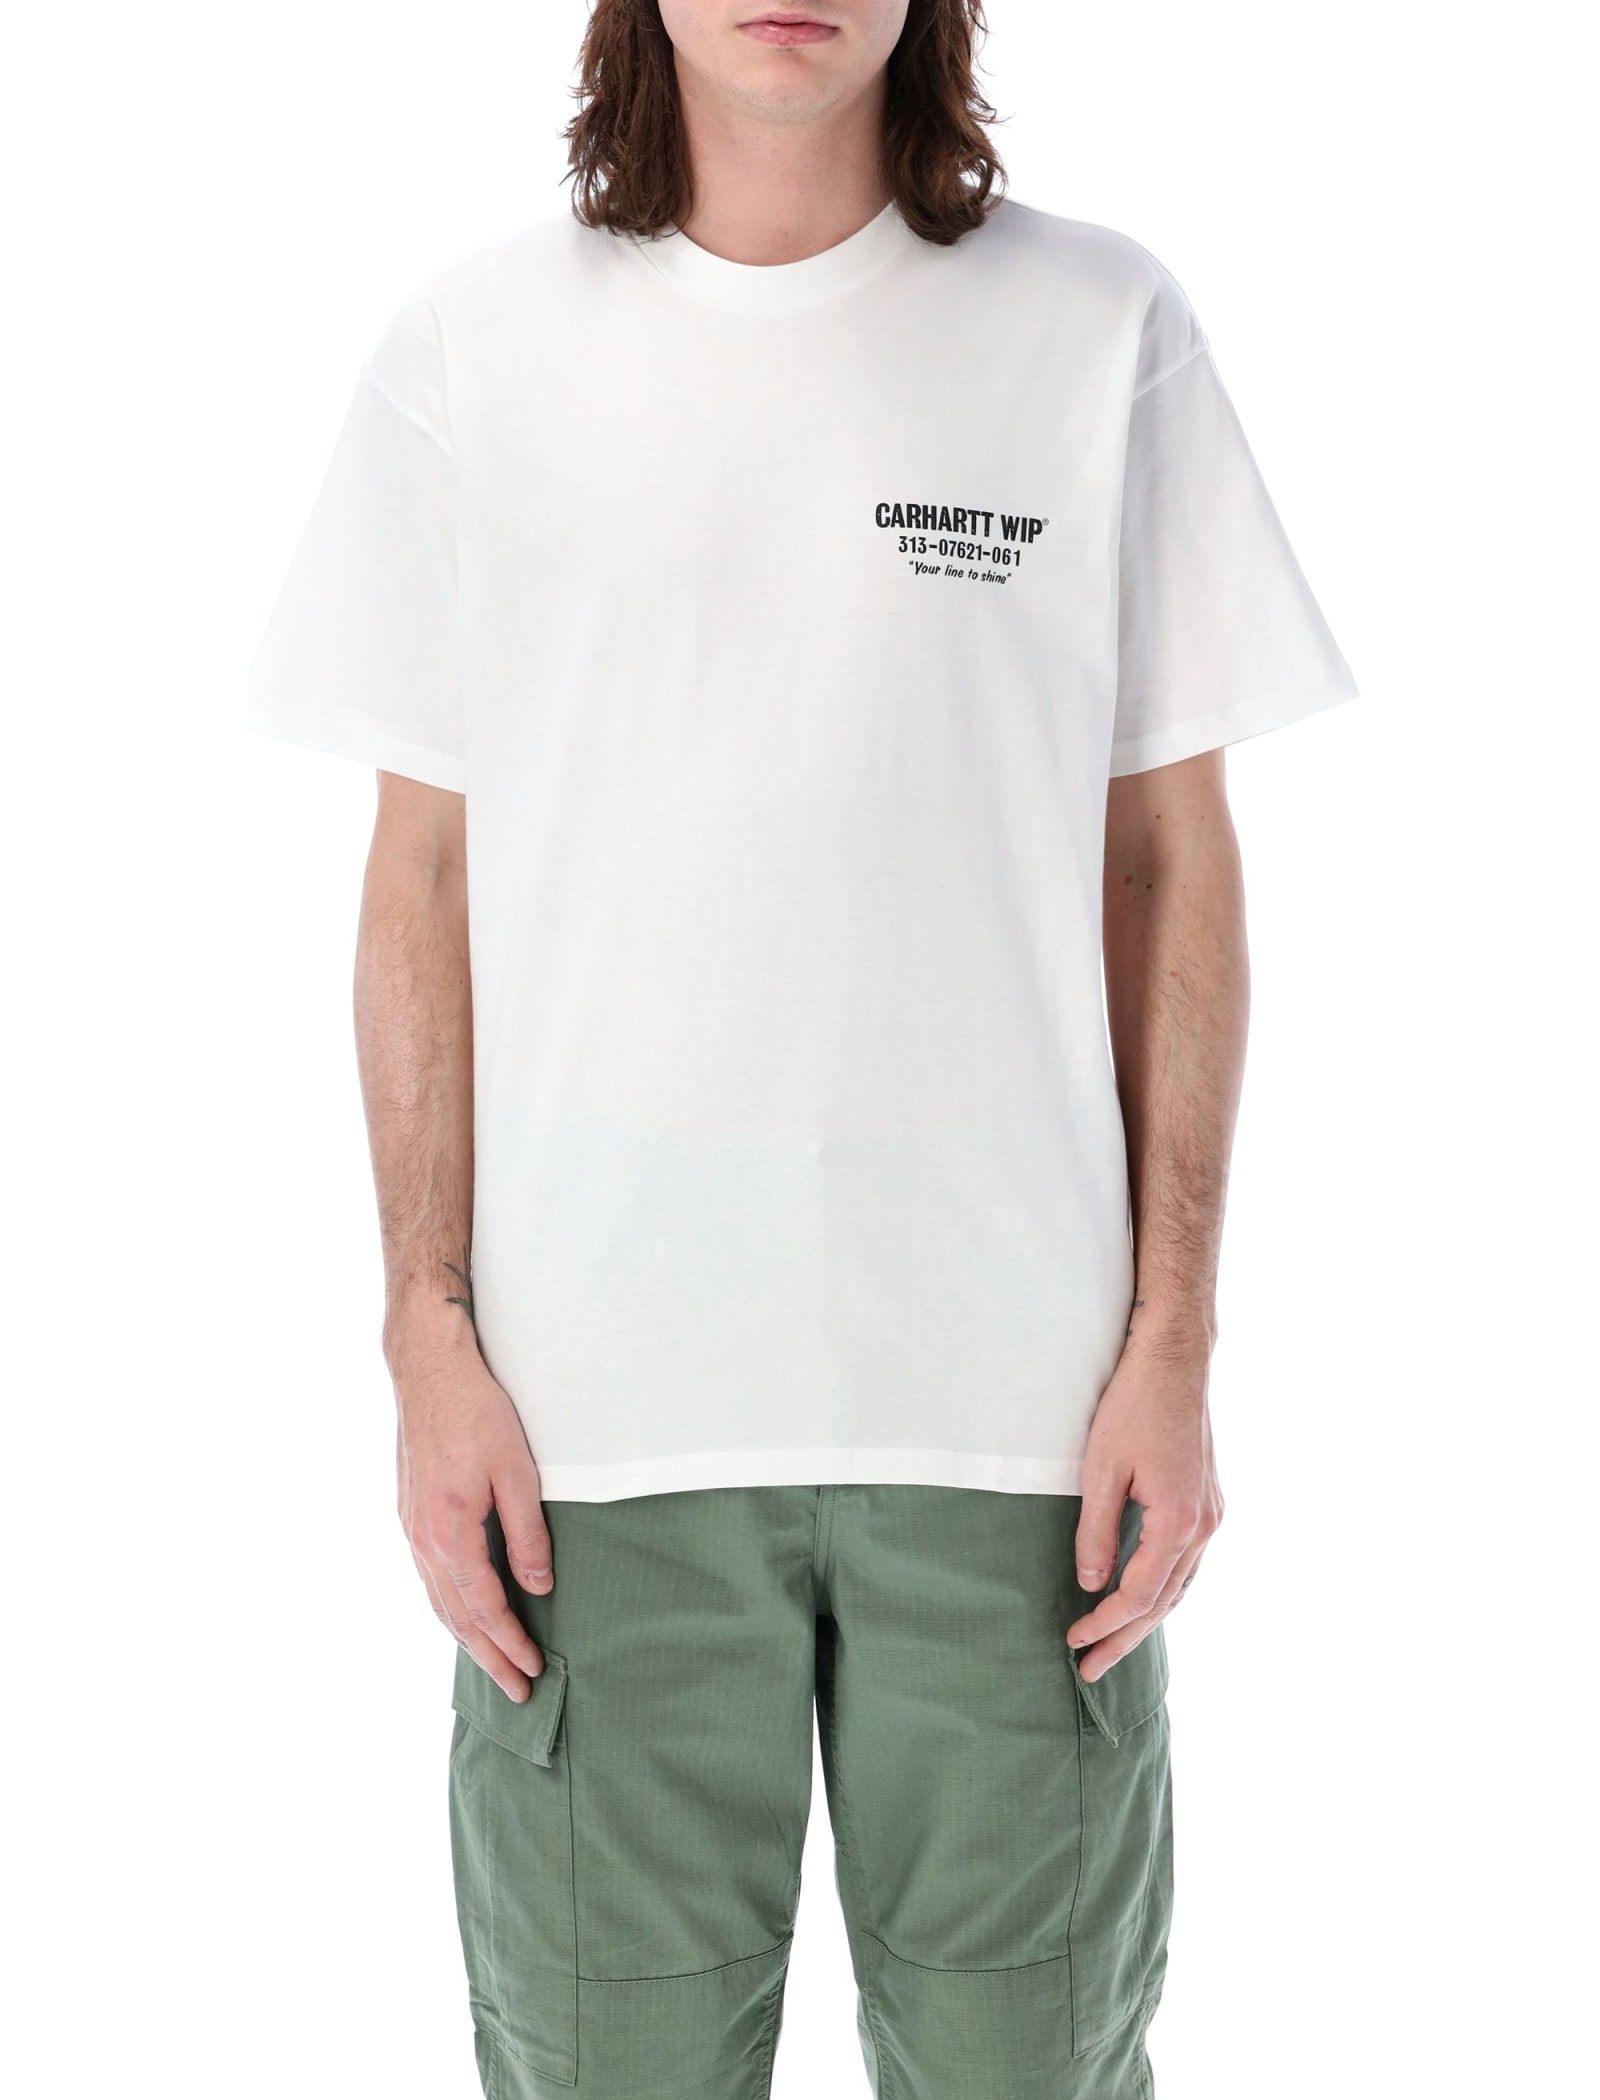 Shop Carhartt S/s Less Troubles T-shirt In White